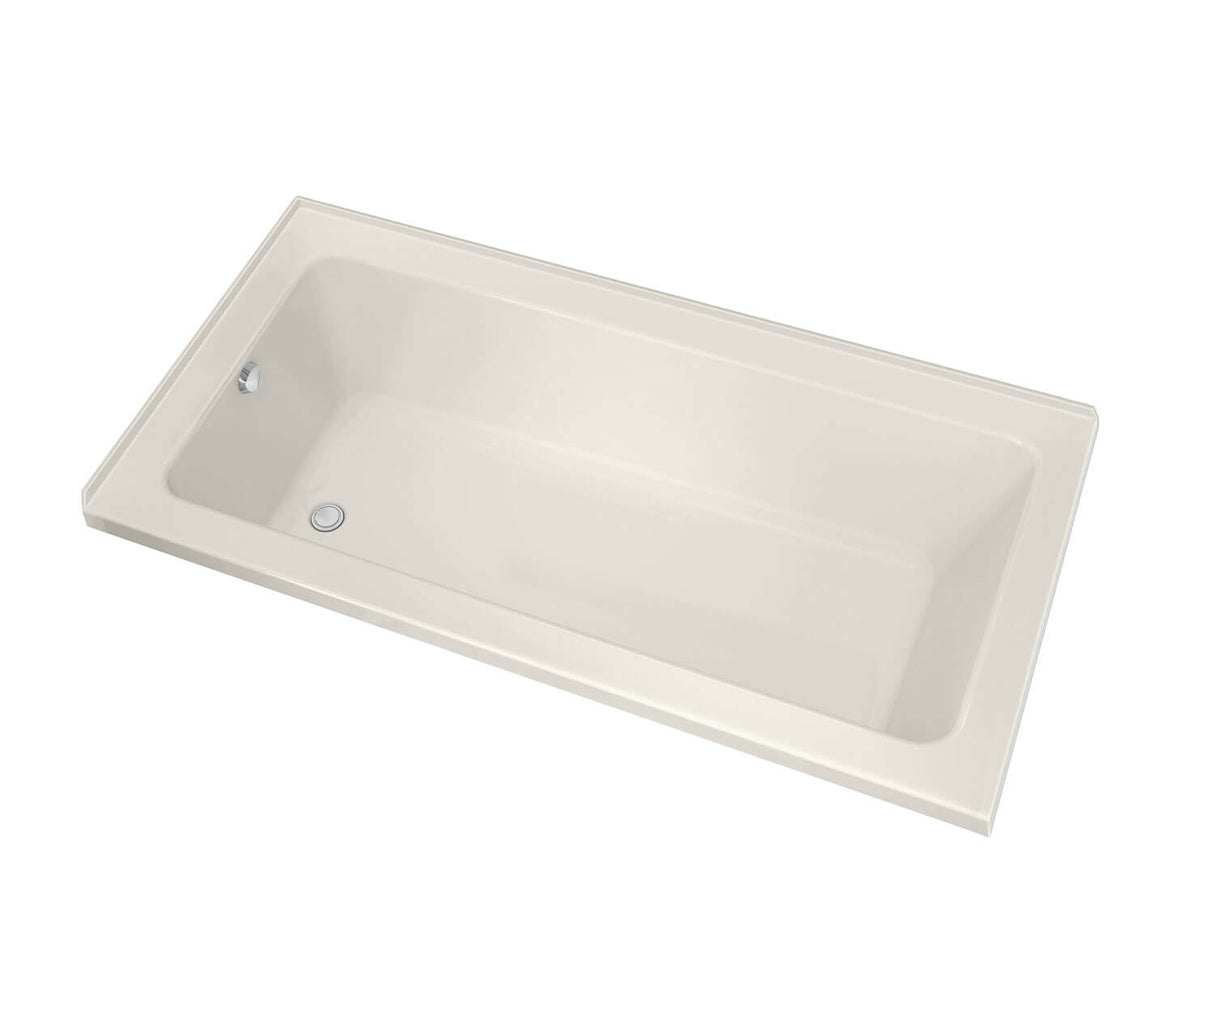 MAAX 106214-R-003-007 Pose 7242 IF Acrylic Corner Left Right-Hand Drain Whirlpool Bathtub in Biscuit